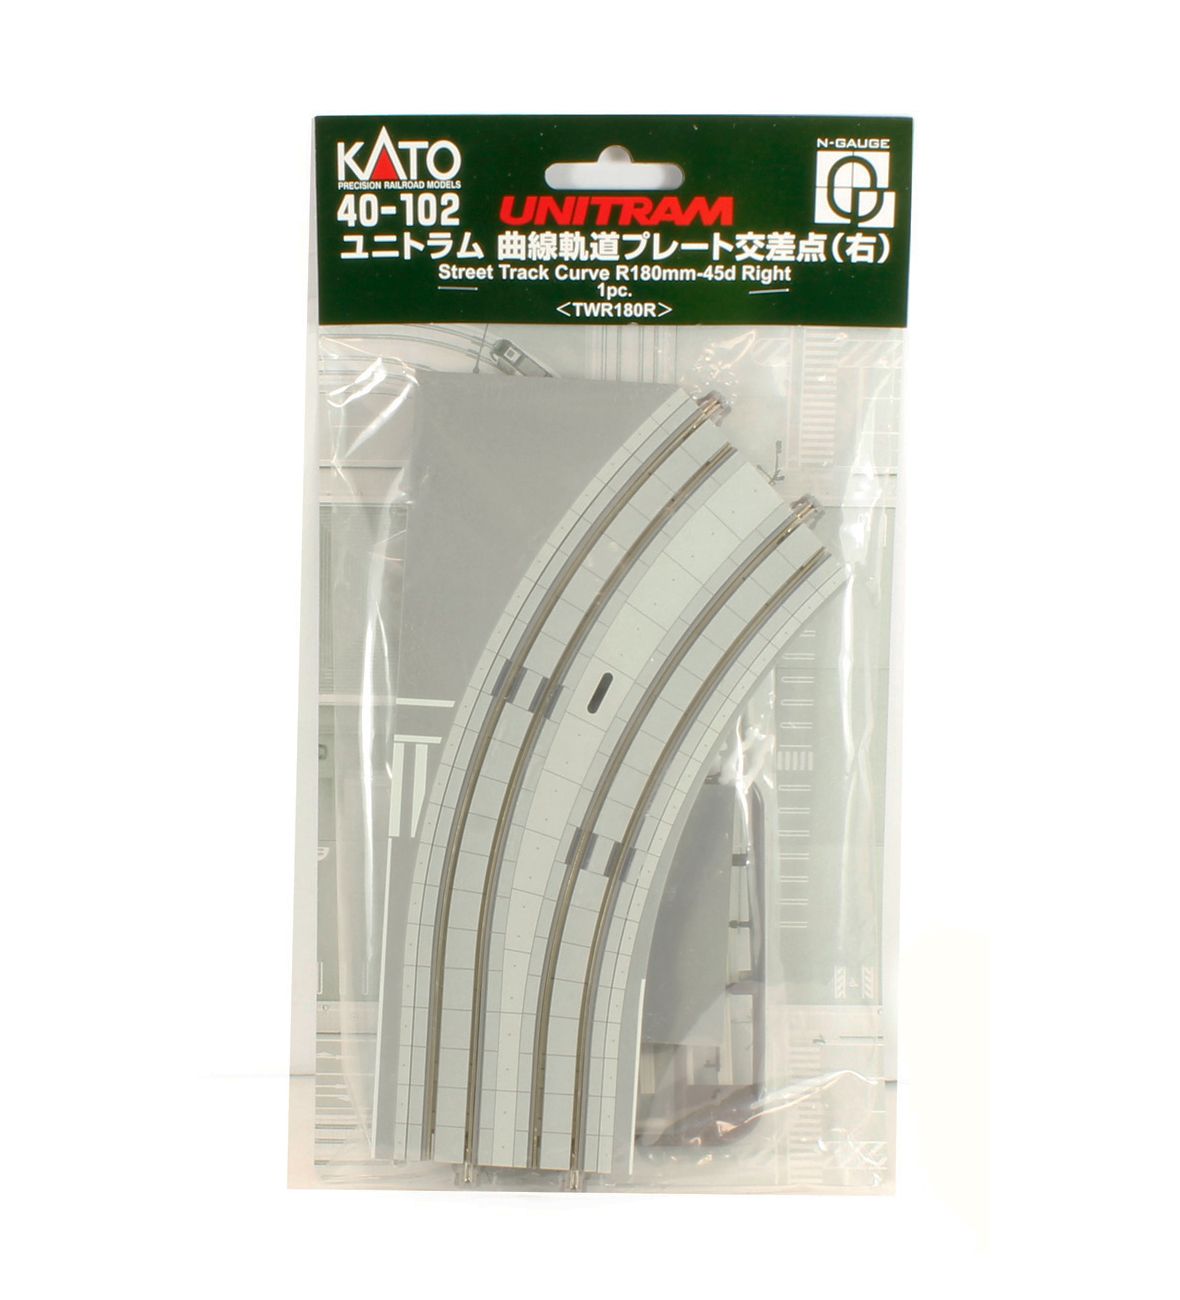 KATO N Scale 23-048 Double Track Viaduct Incline Pier Set 123 for sale online 